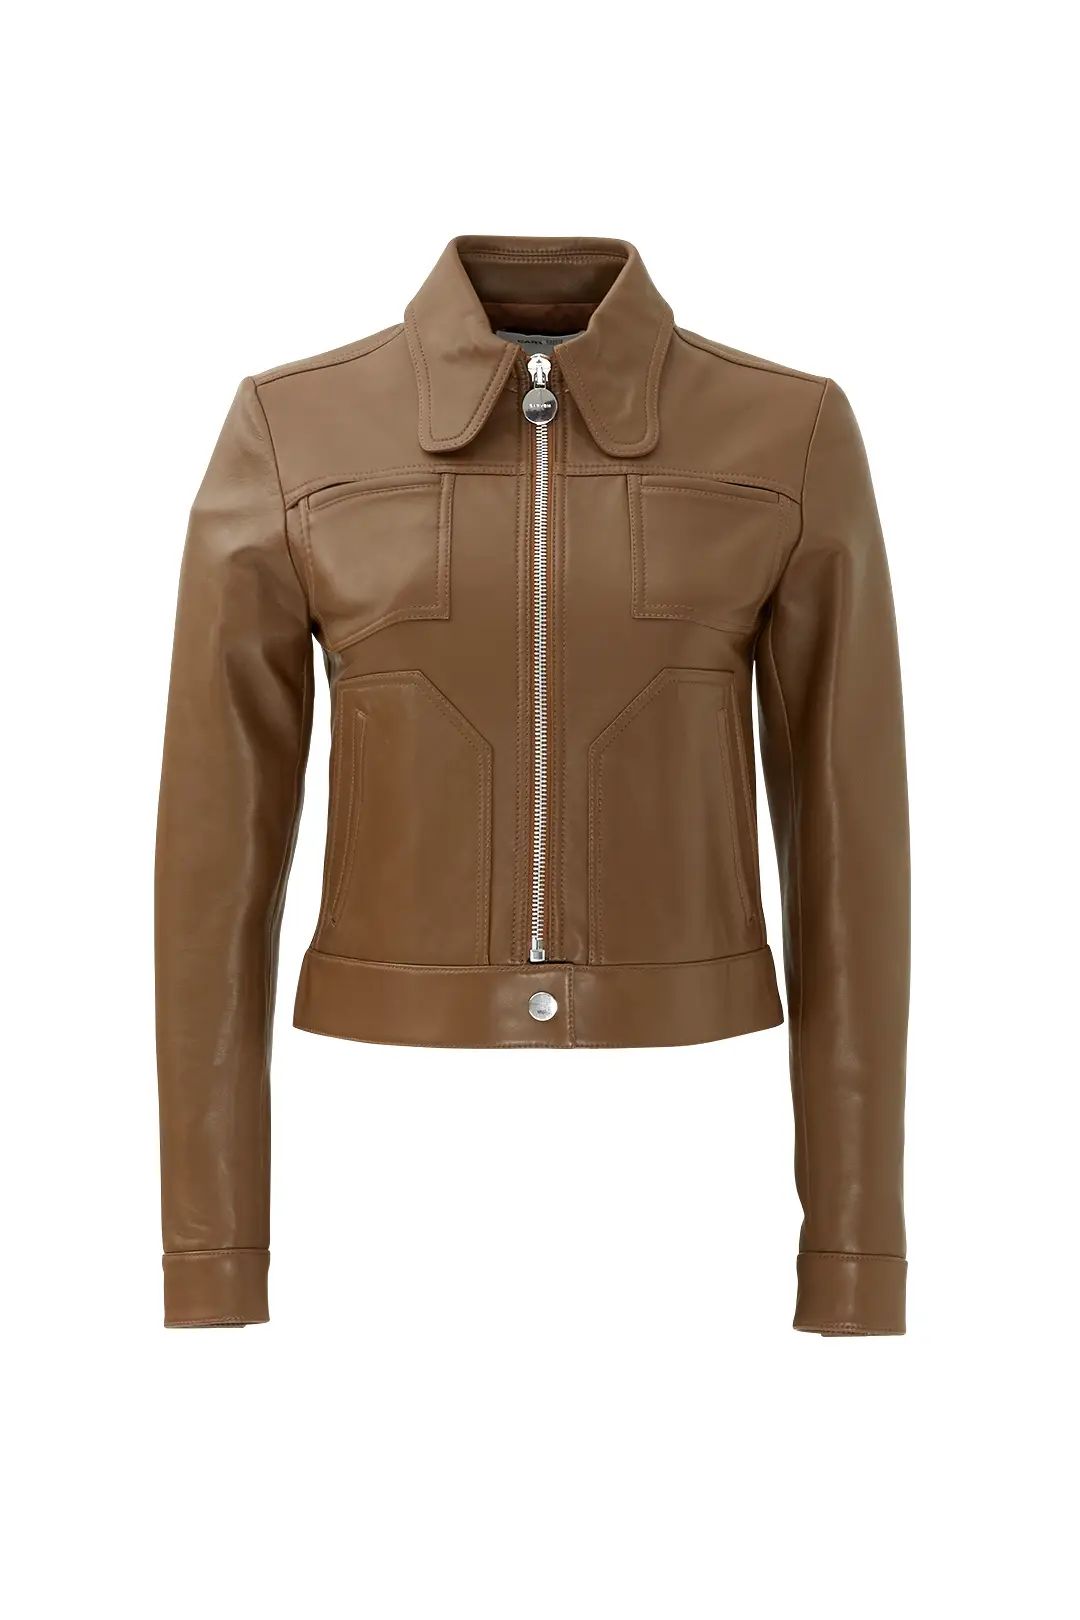 Carven Brown Pilot Leather Jacket | Rent The Runway